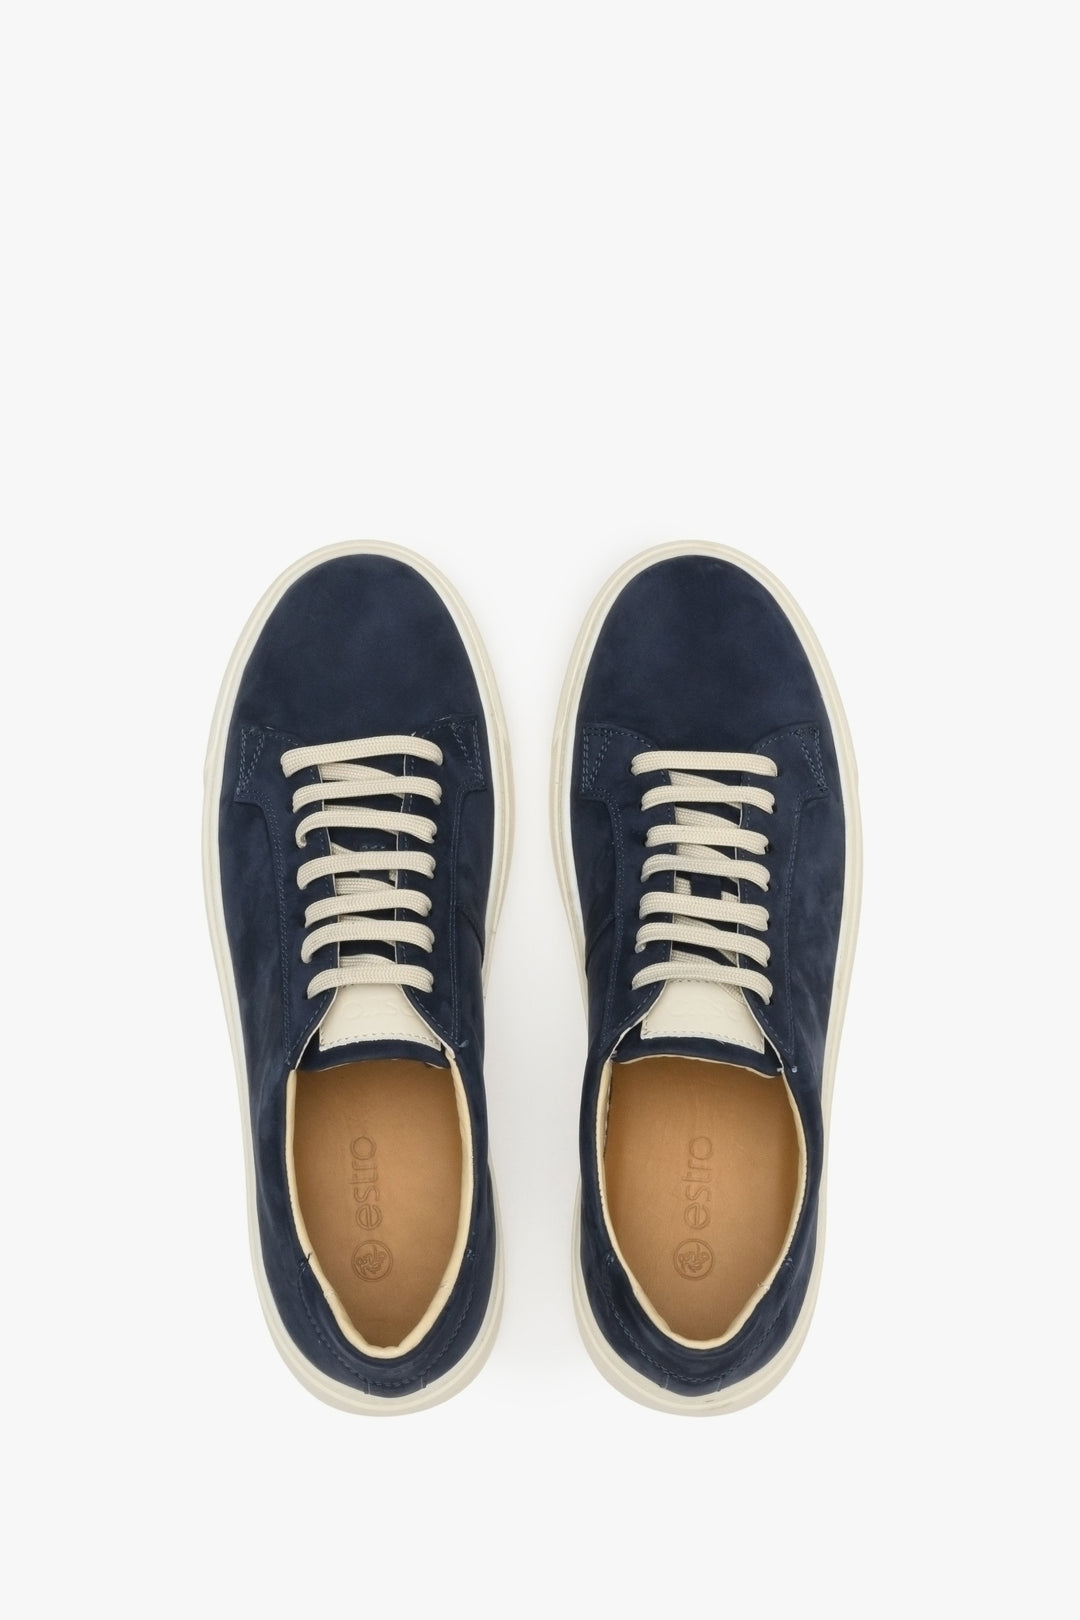 Men's Estro soft, natural nubuck sneakers in navy blue - shoe presentation from above.